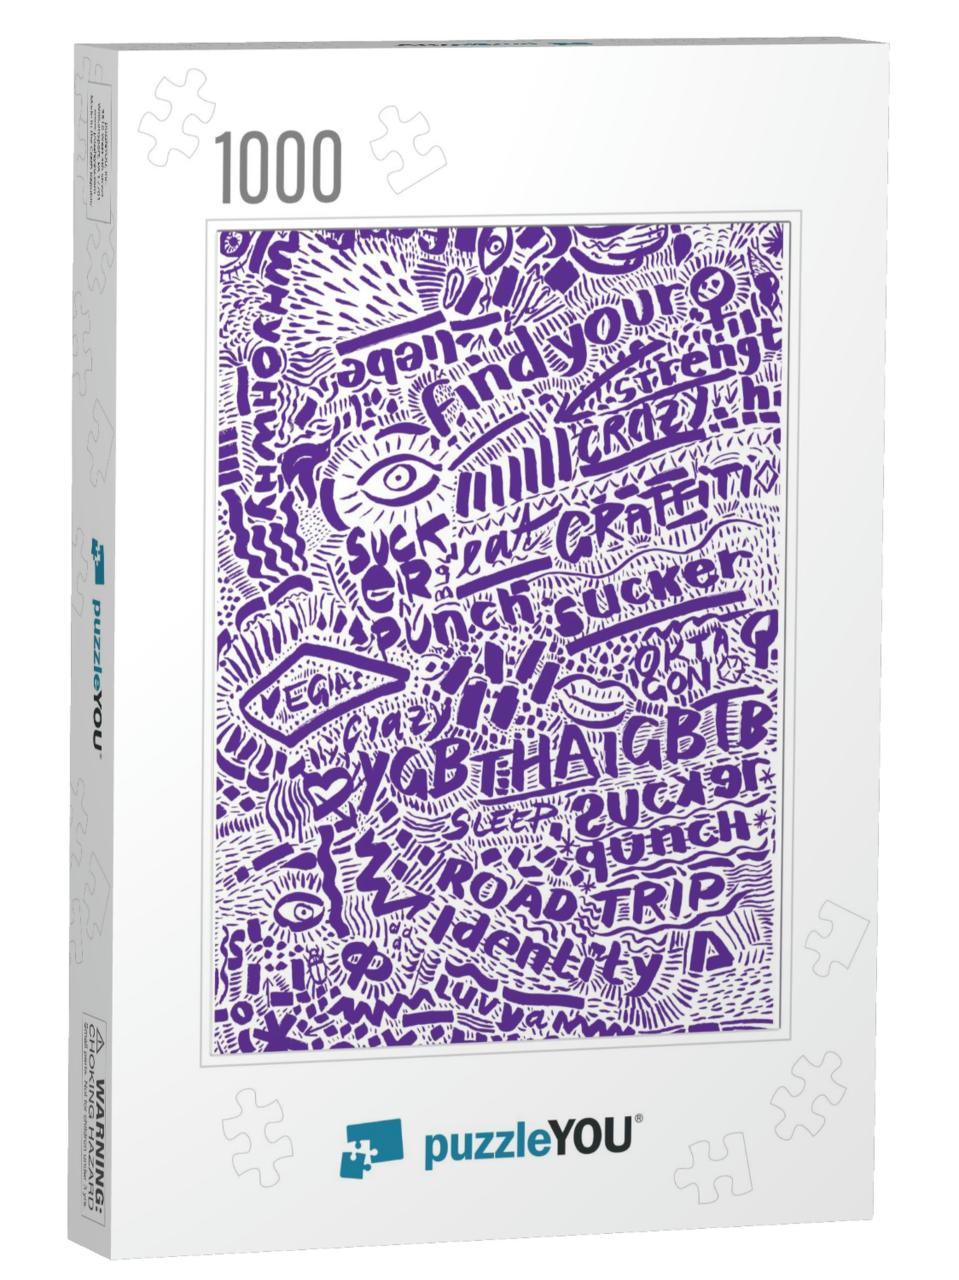 Typographic Graffiti Style Art Print, Calligraphic Expres... Jigsaw Puzzle with 1000 pieces